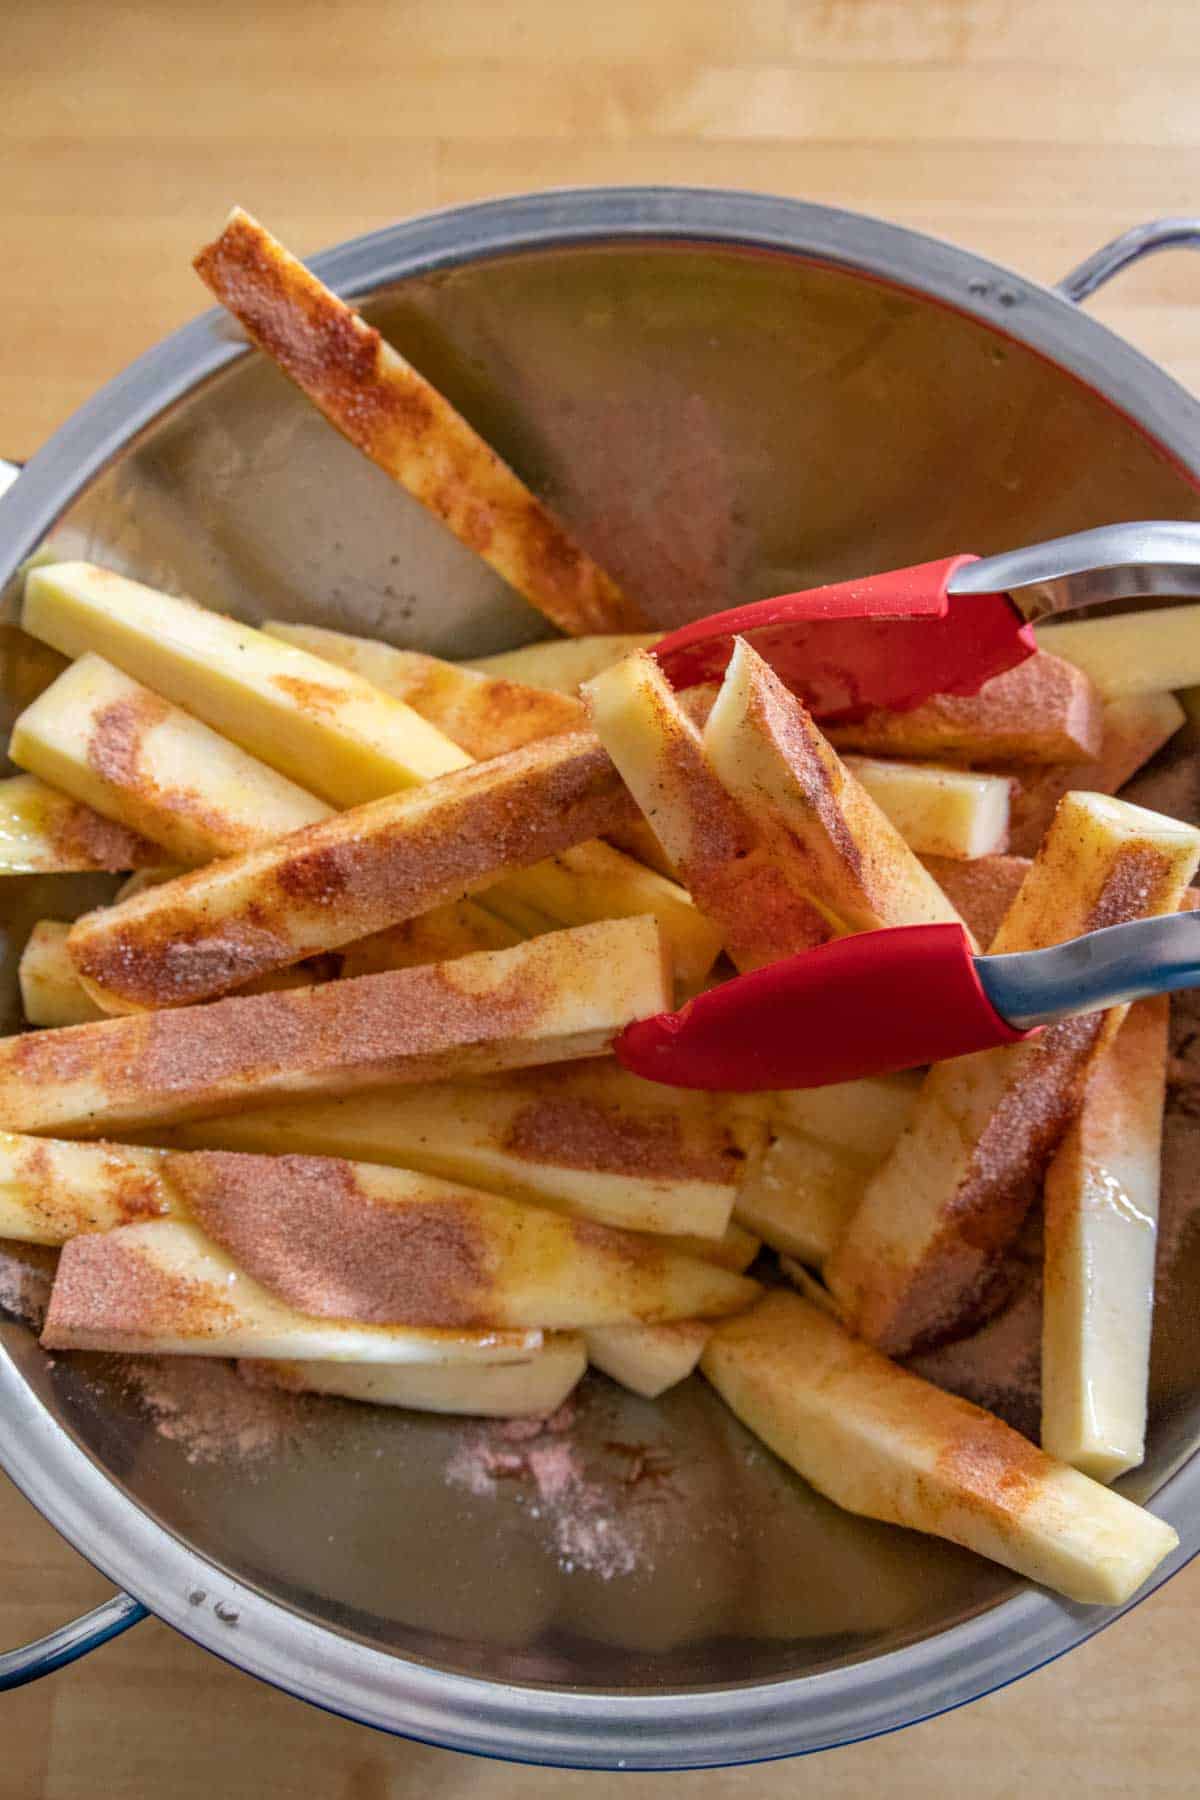 Tossing rutabaga fries with seasoning in a bowl.